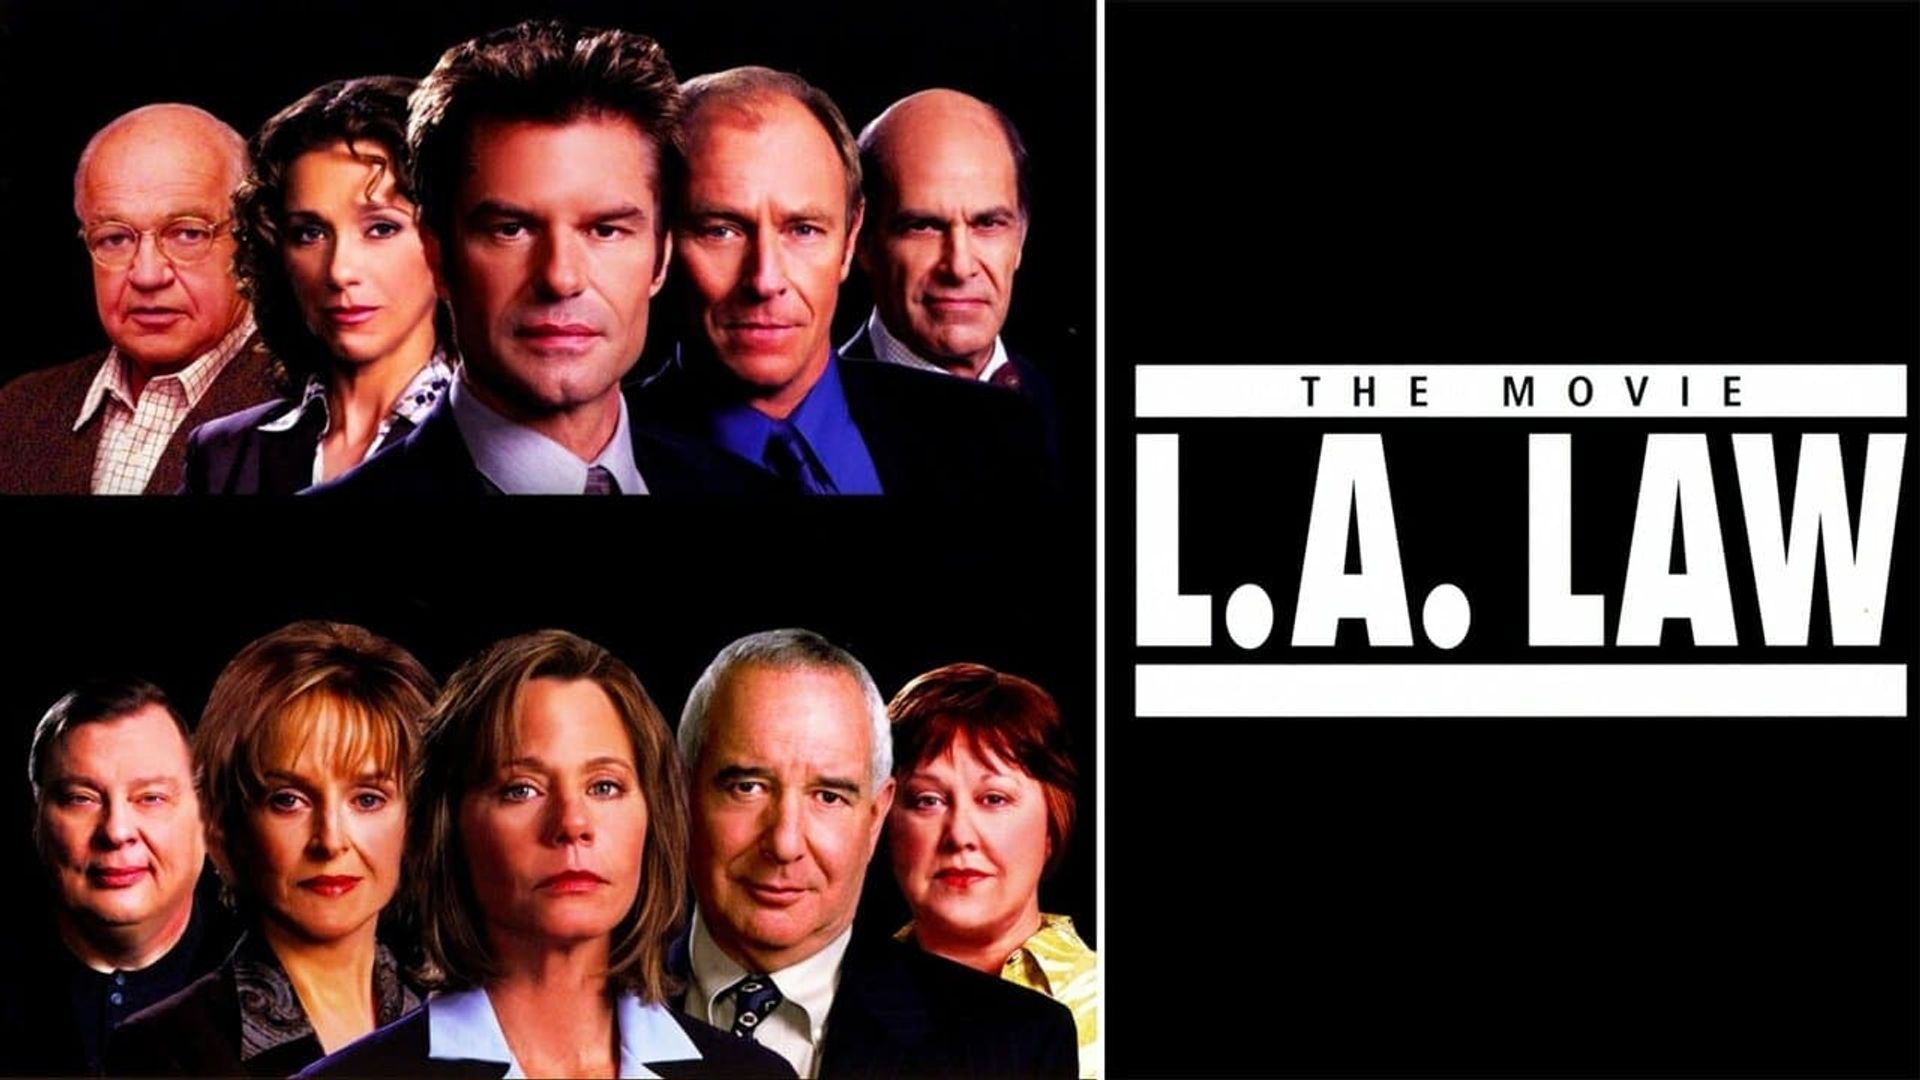 L.A. Law: The Movie background